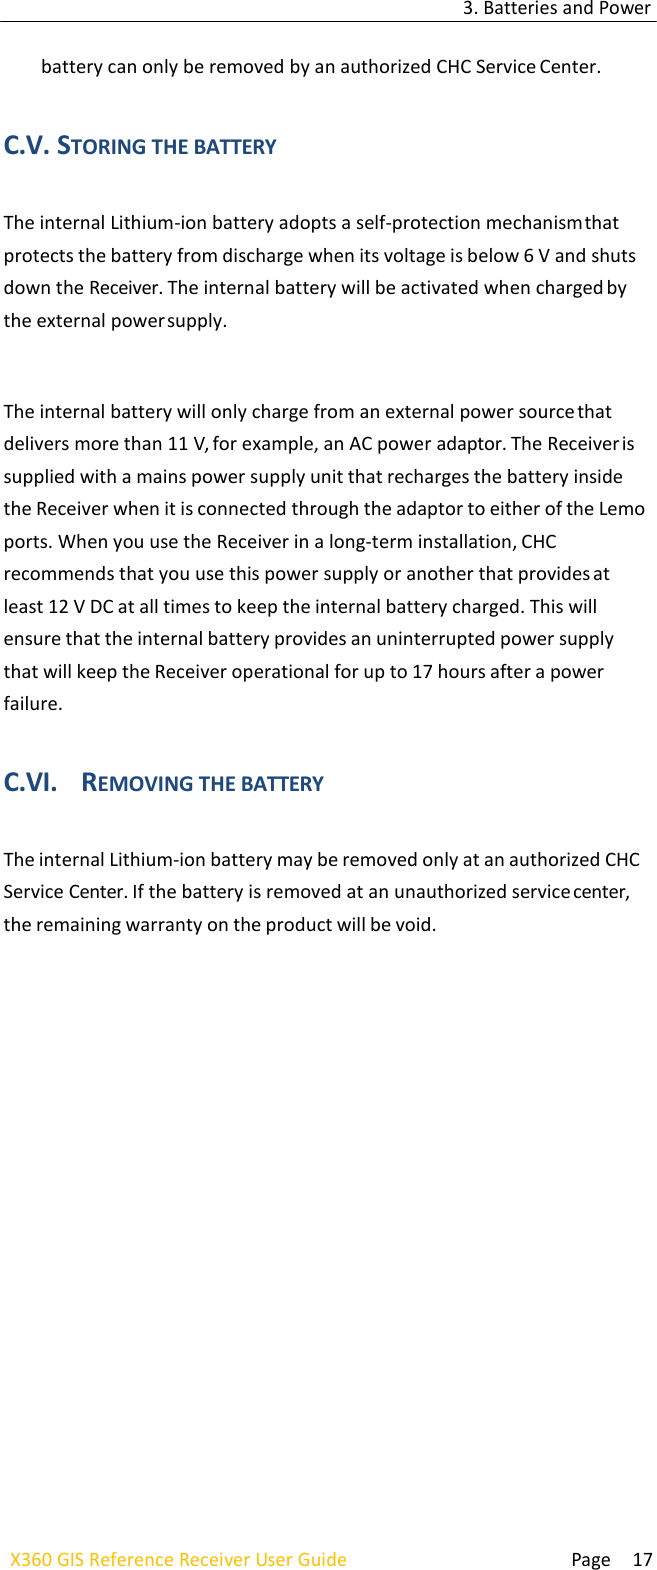 3. Batteries and Power  Page 17 X360 GIS Reference Receiver User Guide    battery can only be removed by an authorized CHC Service Center.   C.V. STORING THE BATTERY  The internal Lithium-ion battery adopts a self-protection mechanism that protects the battery from discharge when its voltage is below 6 V and shuts down the Receiver. The internal battery will be activated when charged by the external power supply.   The internal battery will only charge from an external power source that delivers more than 11 V, for example, an AC power adaptor. The Receiver is supplied with a mains power supply unit that recharges the battery inside the Receiver when it is connected through the adaptor to either of the Lemo ports. When you use the Receiver in a long-term installation, CHC recommends that you use this power supply or another that provides at least 12 V DC at all times to keep the internal battery charged. This will ensure that the internal battery provides an uninterrupted power supply that will keep the Receiver operational for up to 17 hours after a power failure.  C.VI. REMOVING THE BATTERY  The internal Lithium-ion battery may be removed only at an authorized CHC Service Center. If the battery is removed at an unauthorized service center, the remaining warranty on the product will be void. 